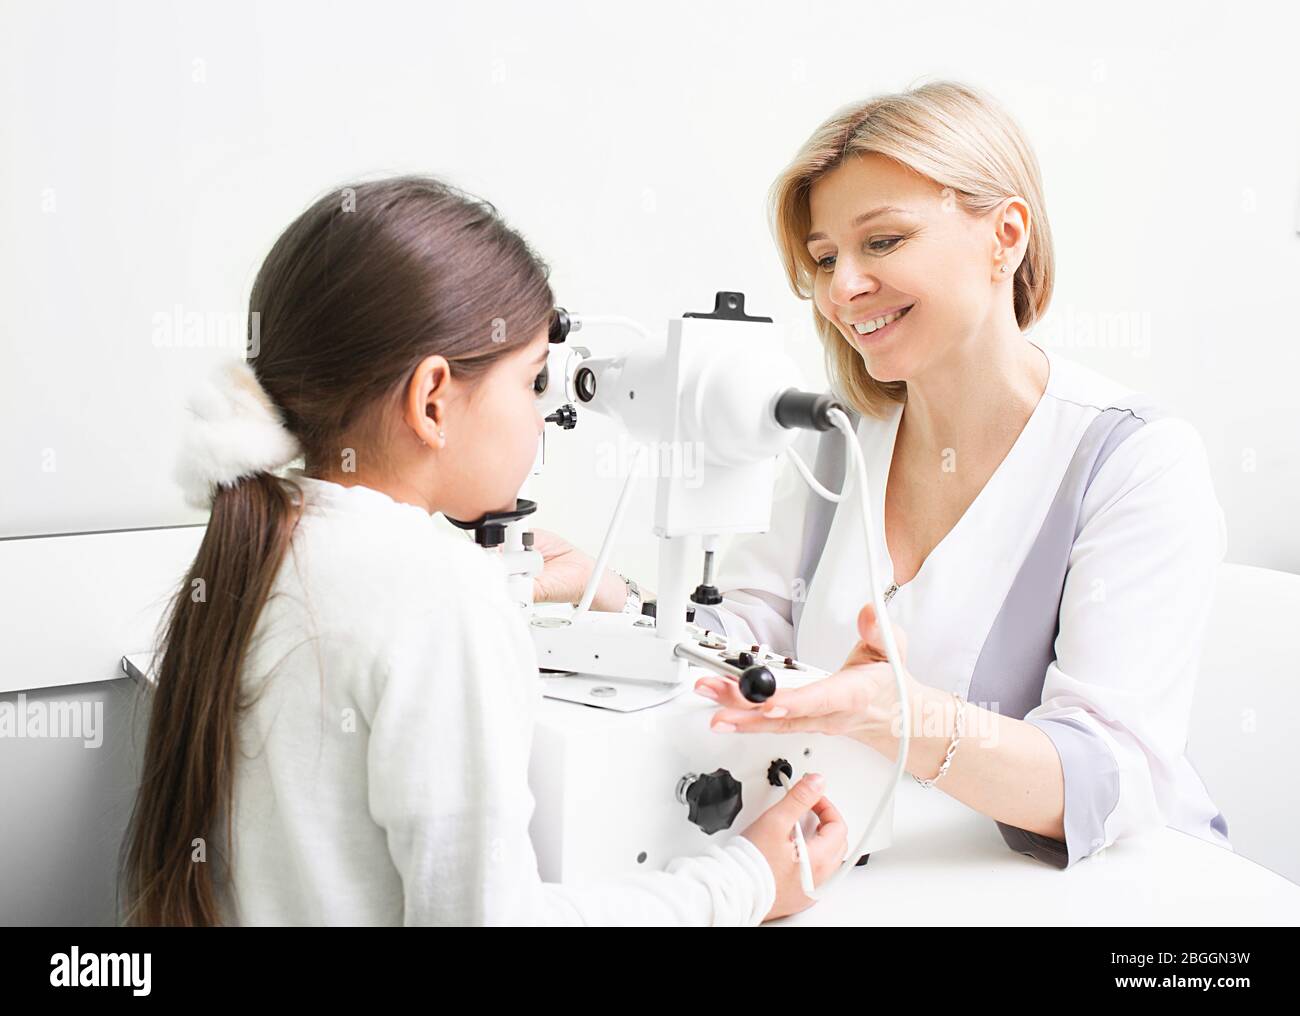 Ophthalmologist performs strabismus checkup using synoptophore. Strabismus treatment of a girl patient Stock Photo